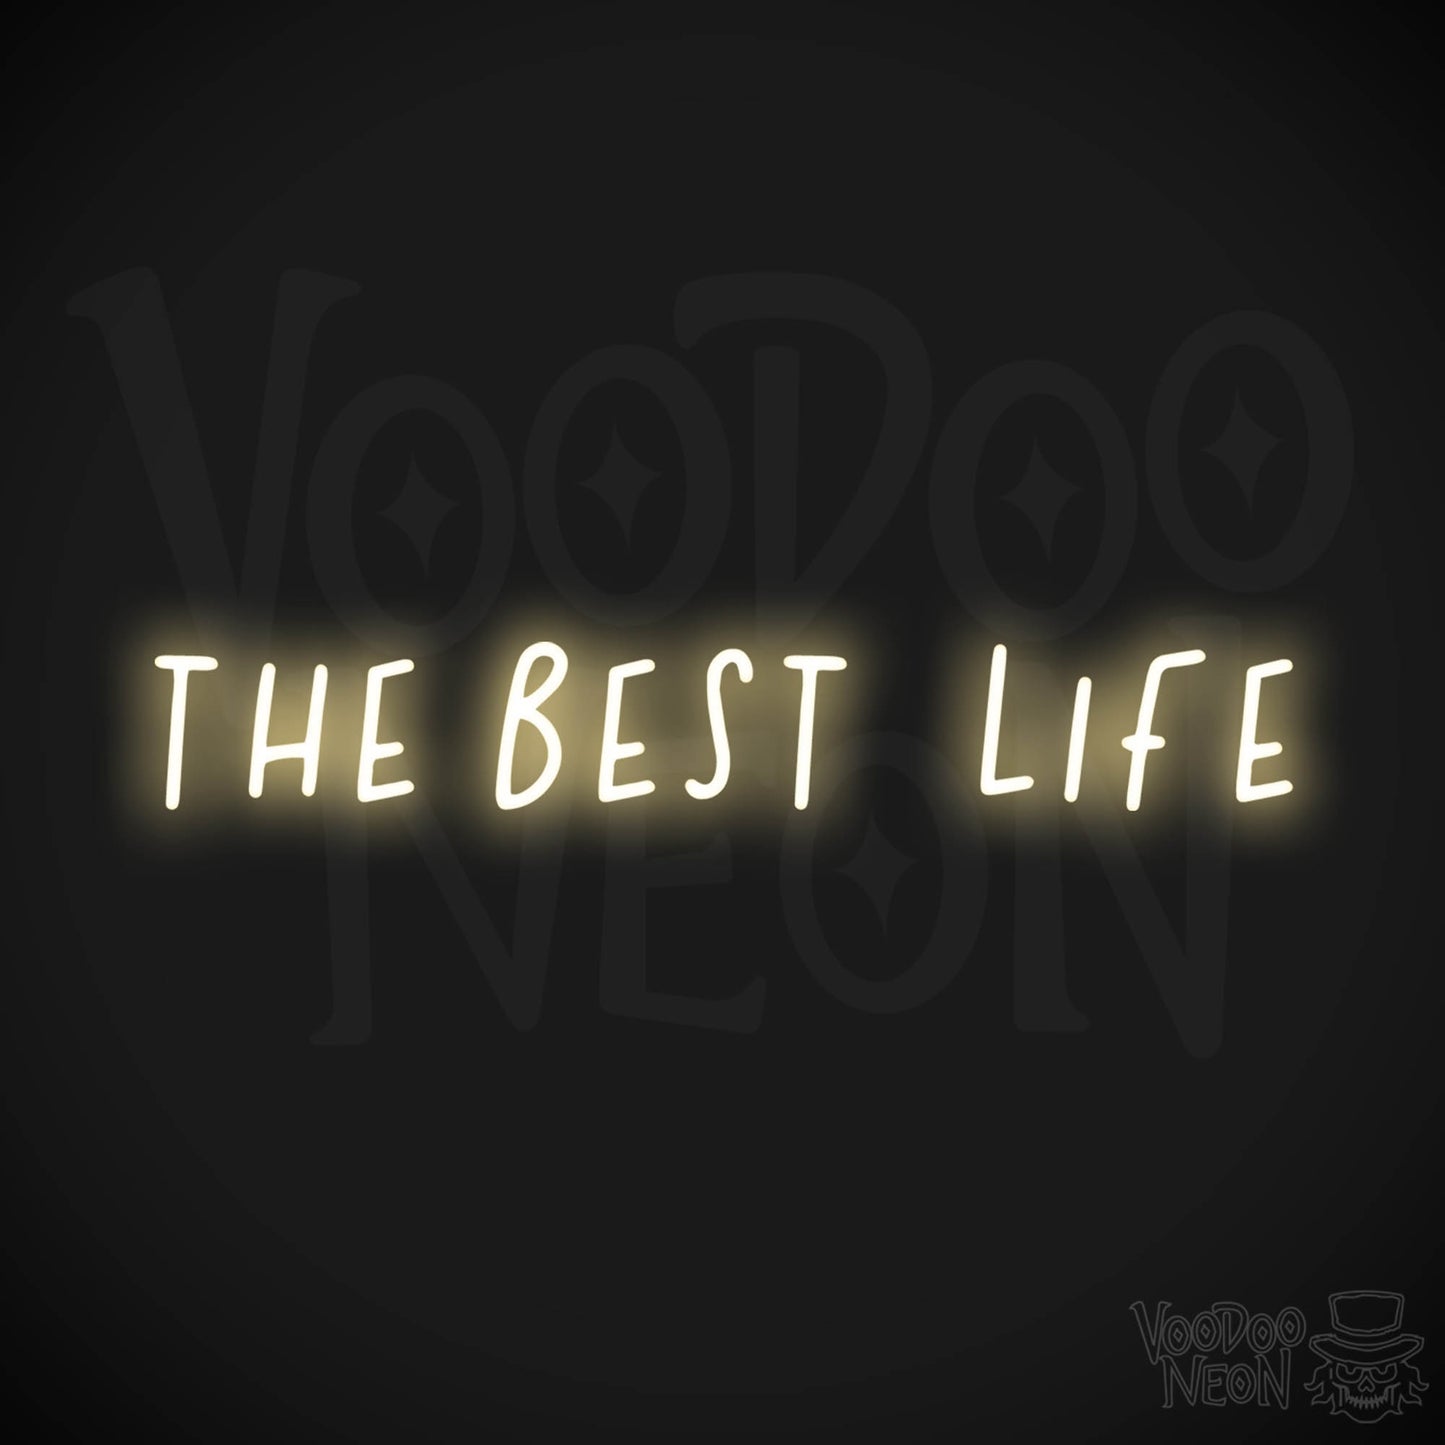 The Best Life LED Neon - Warm White